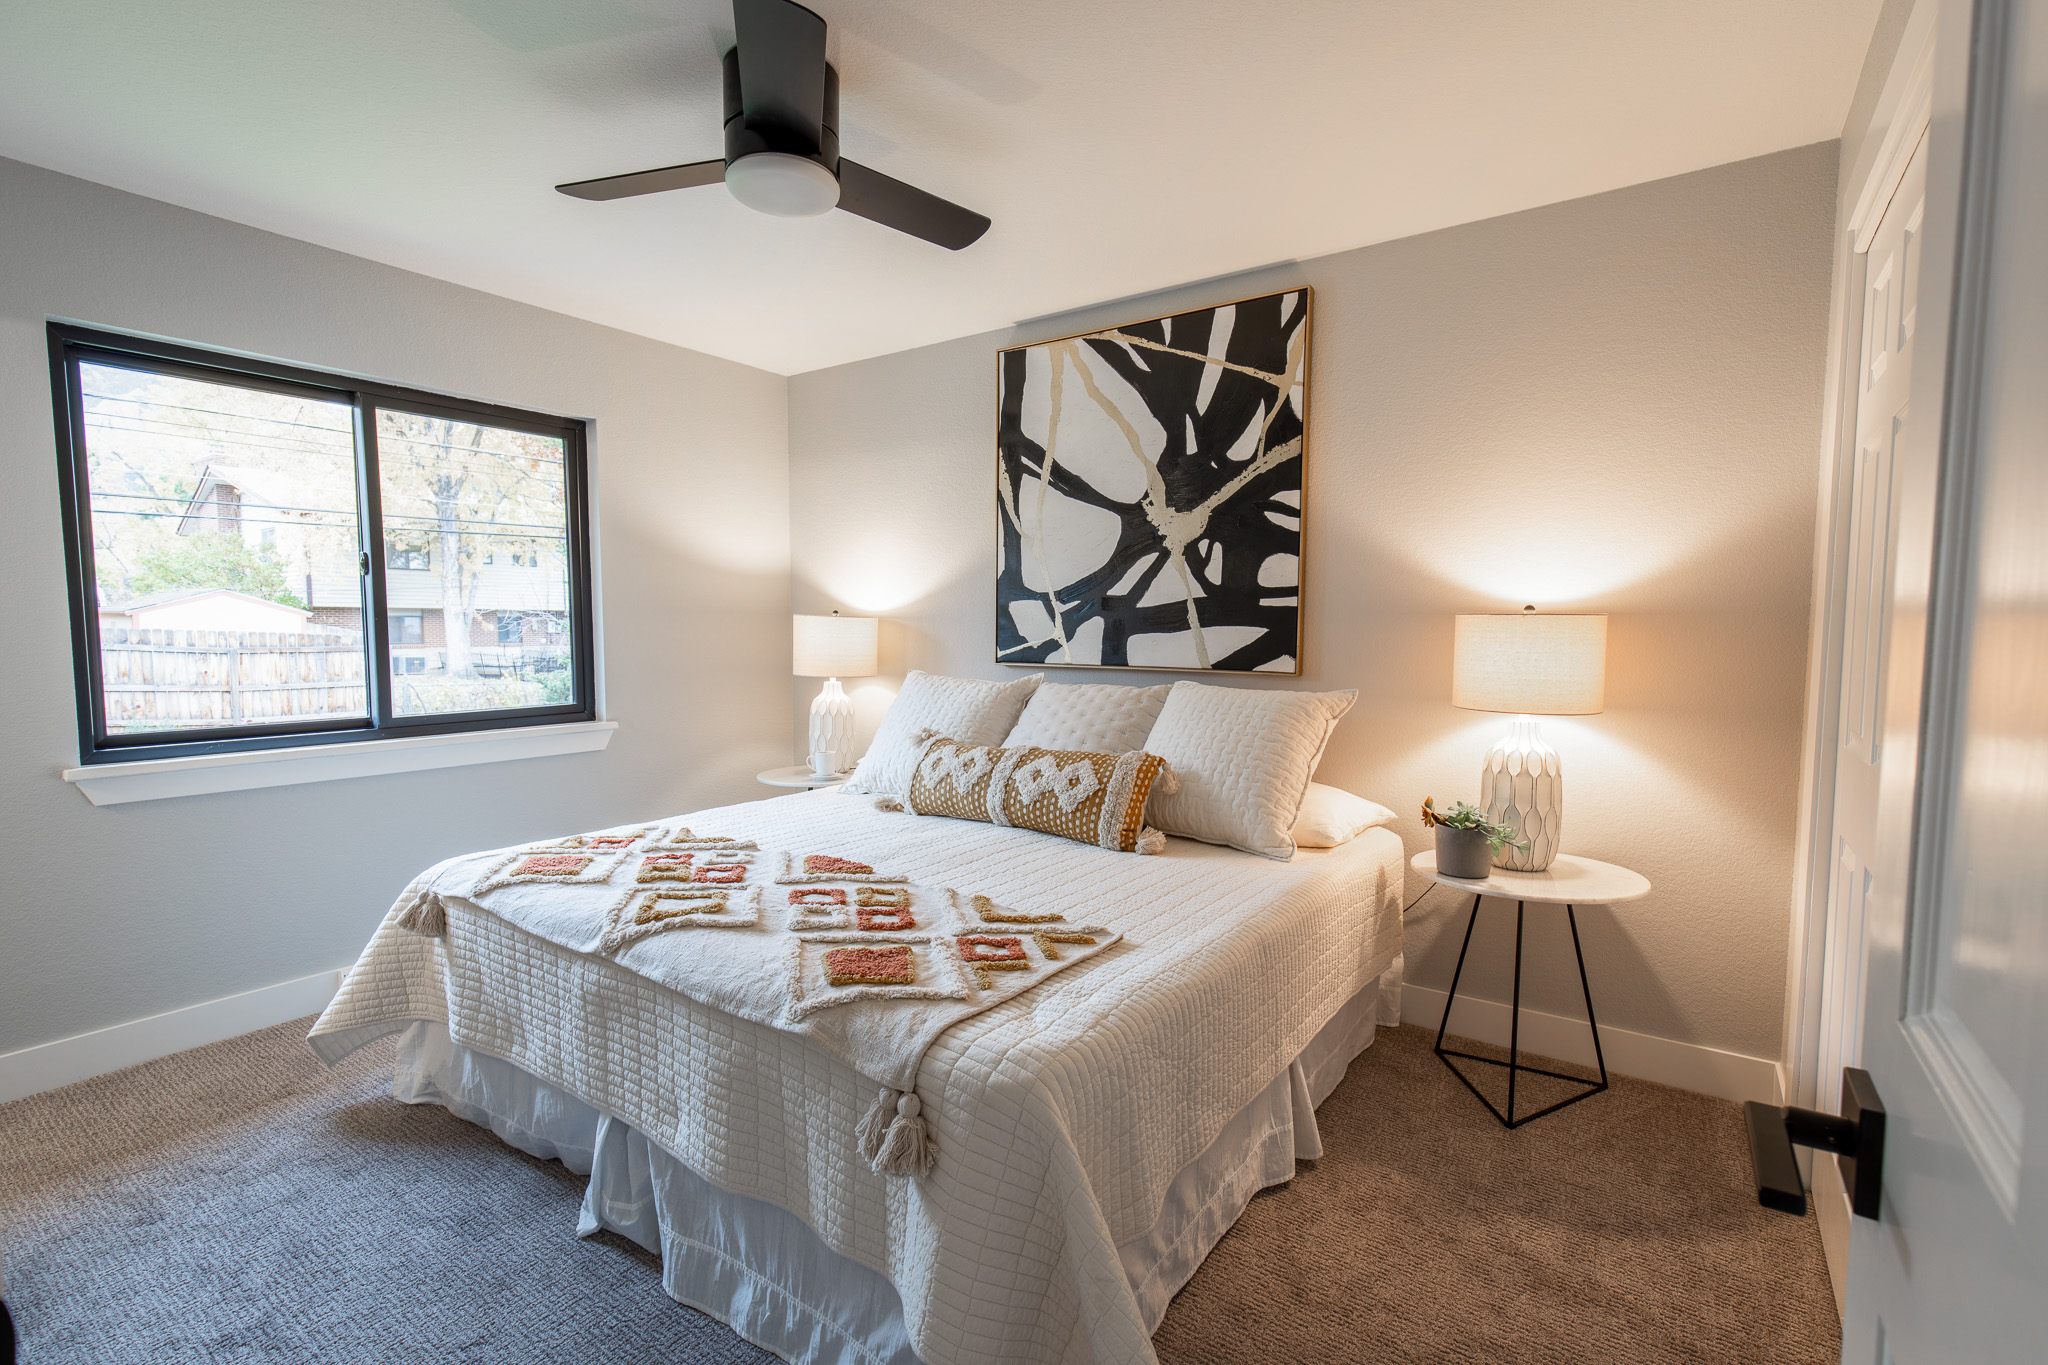 A furnished queen bed is at the center of a newly renovated bedroom, between two nightstands with lamps providing warm light throughout the room.